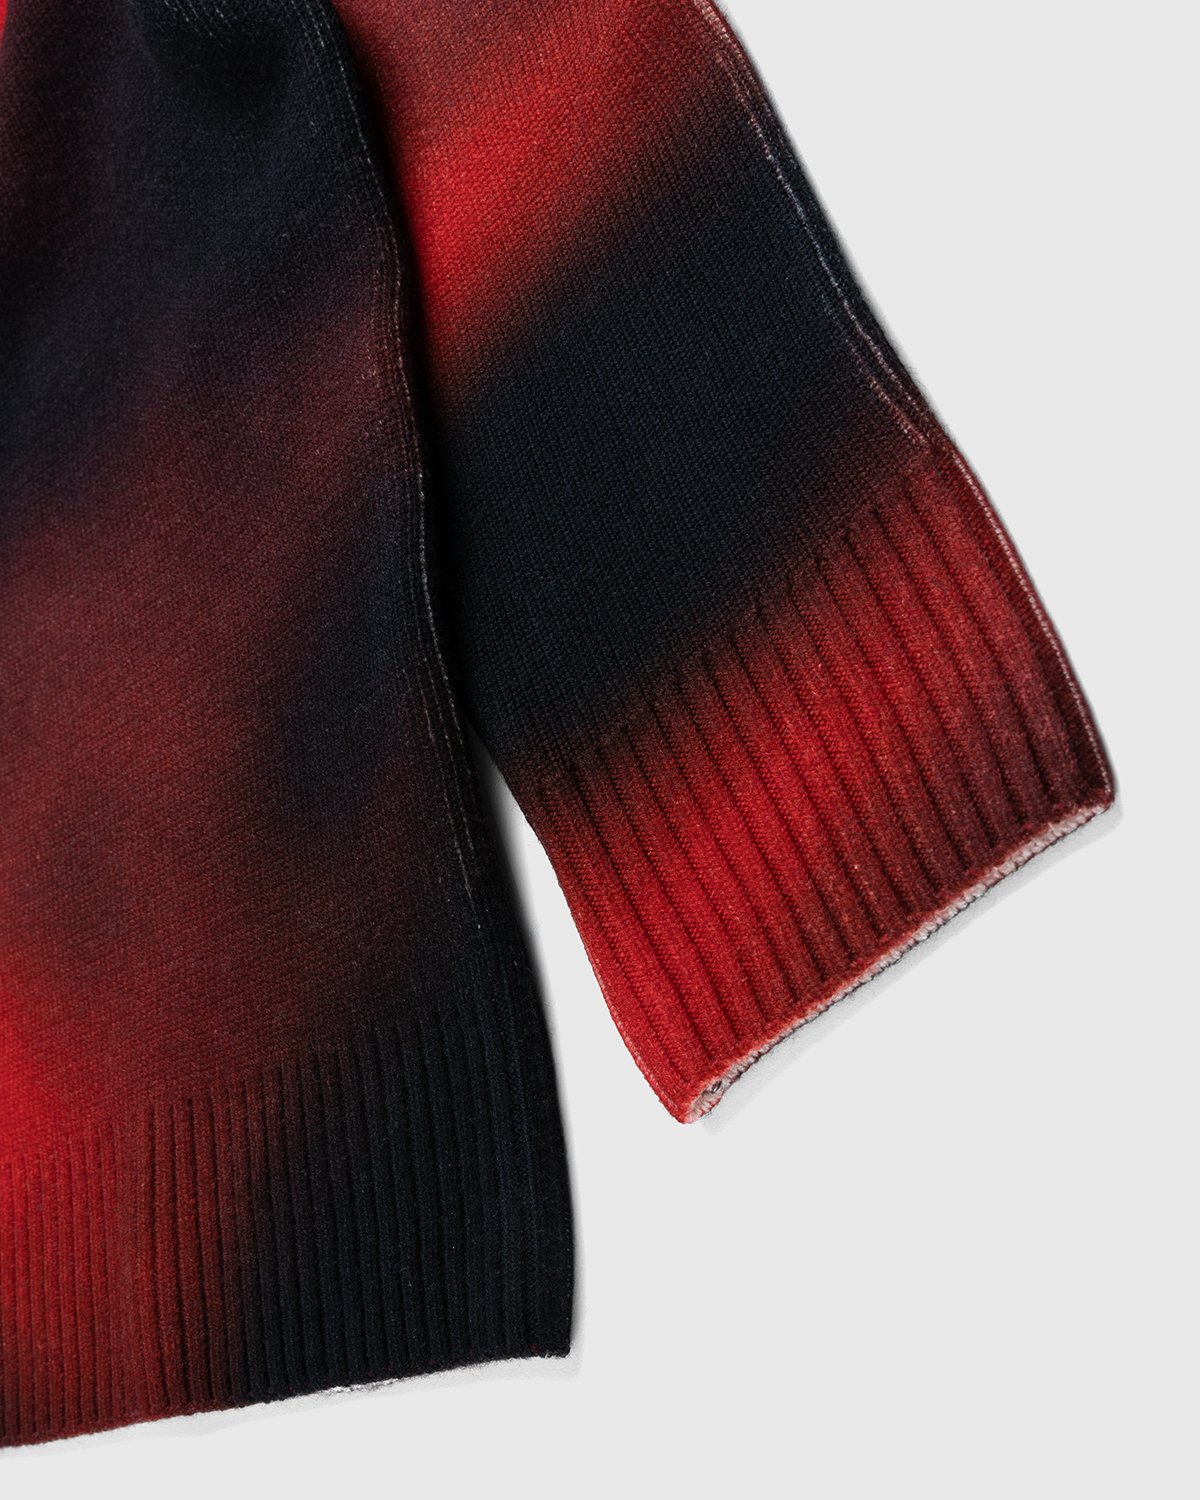 A-Cold-Wall* - Digital Print Knit Red - Clothing - Red - Image 4